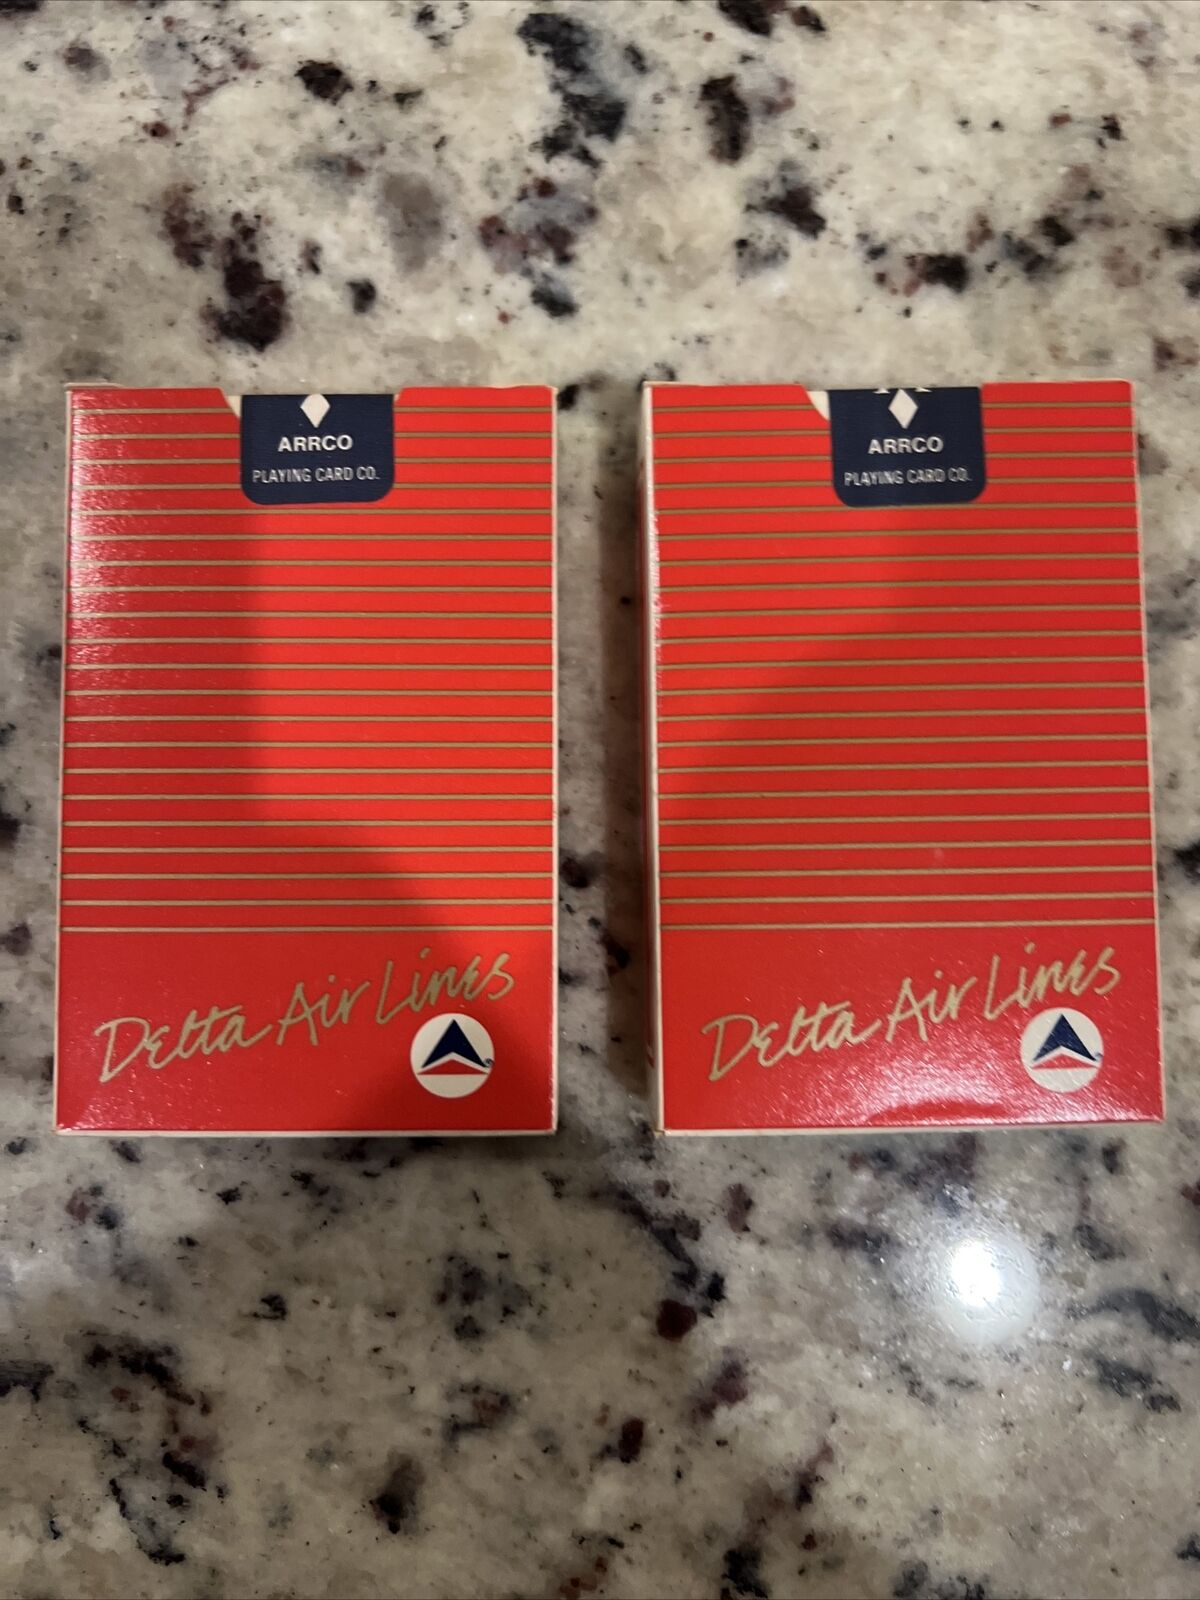 Vintage Delta Airlines Arrco Playing Cards Lot Of 2 Packs New Sealed Unopened